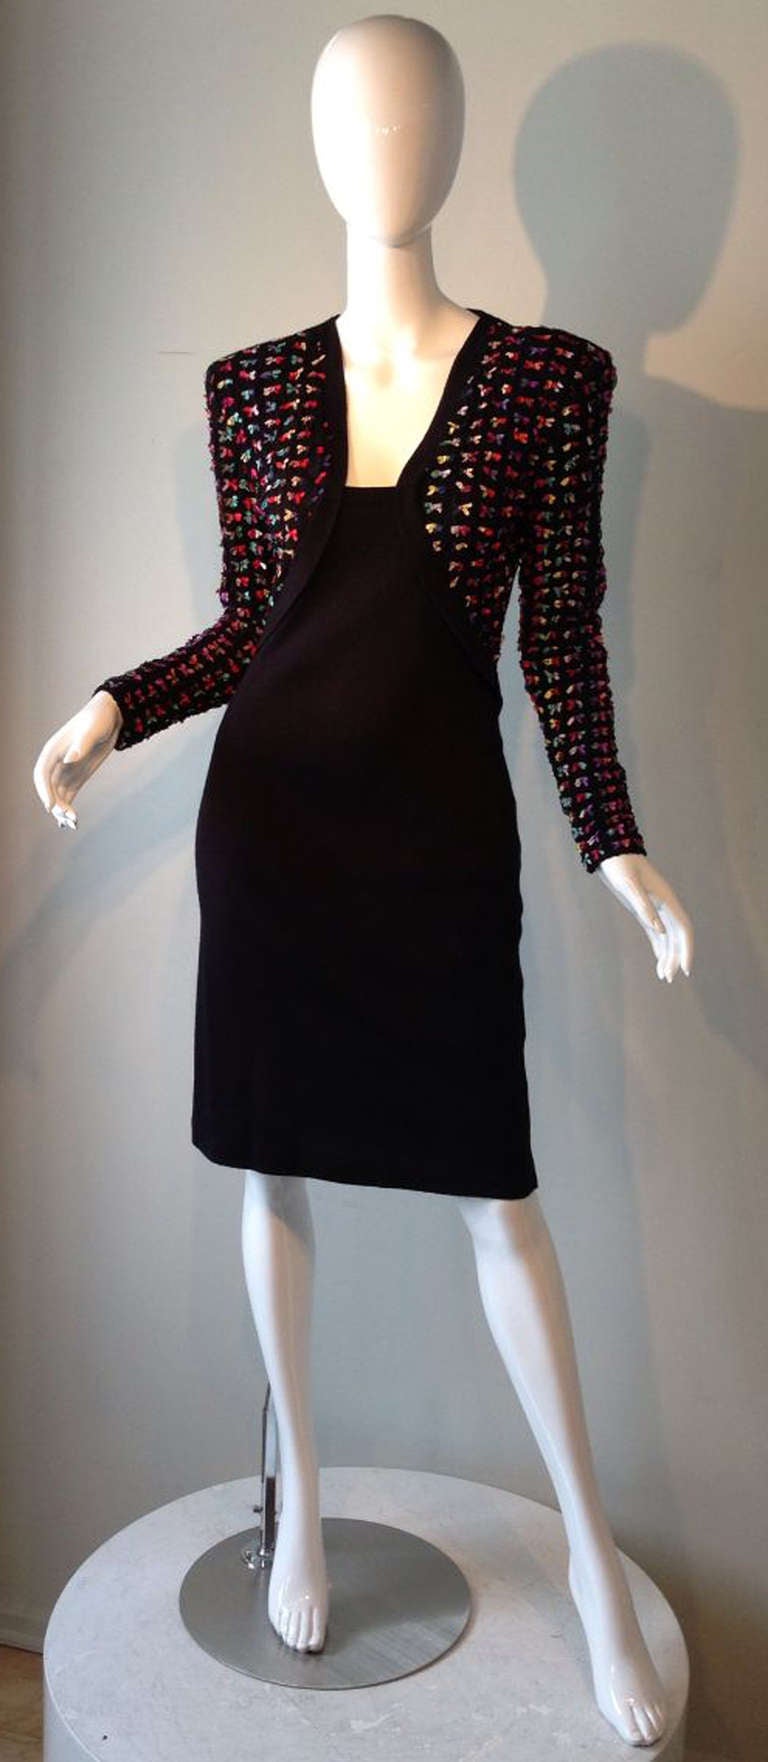 A fine and rare vintage Patrick Kelly cocktail dress. Stretch body conscience fabric item features a trompe l'oeil effect jacket front completely covered in attached miniature silk fabric bows. Item zips up back with built in shoulder pads.